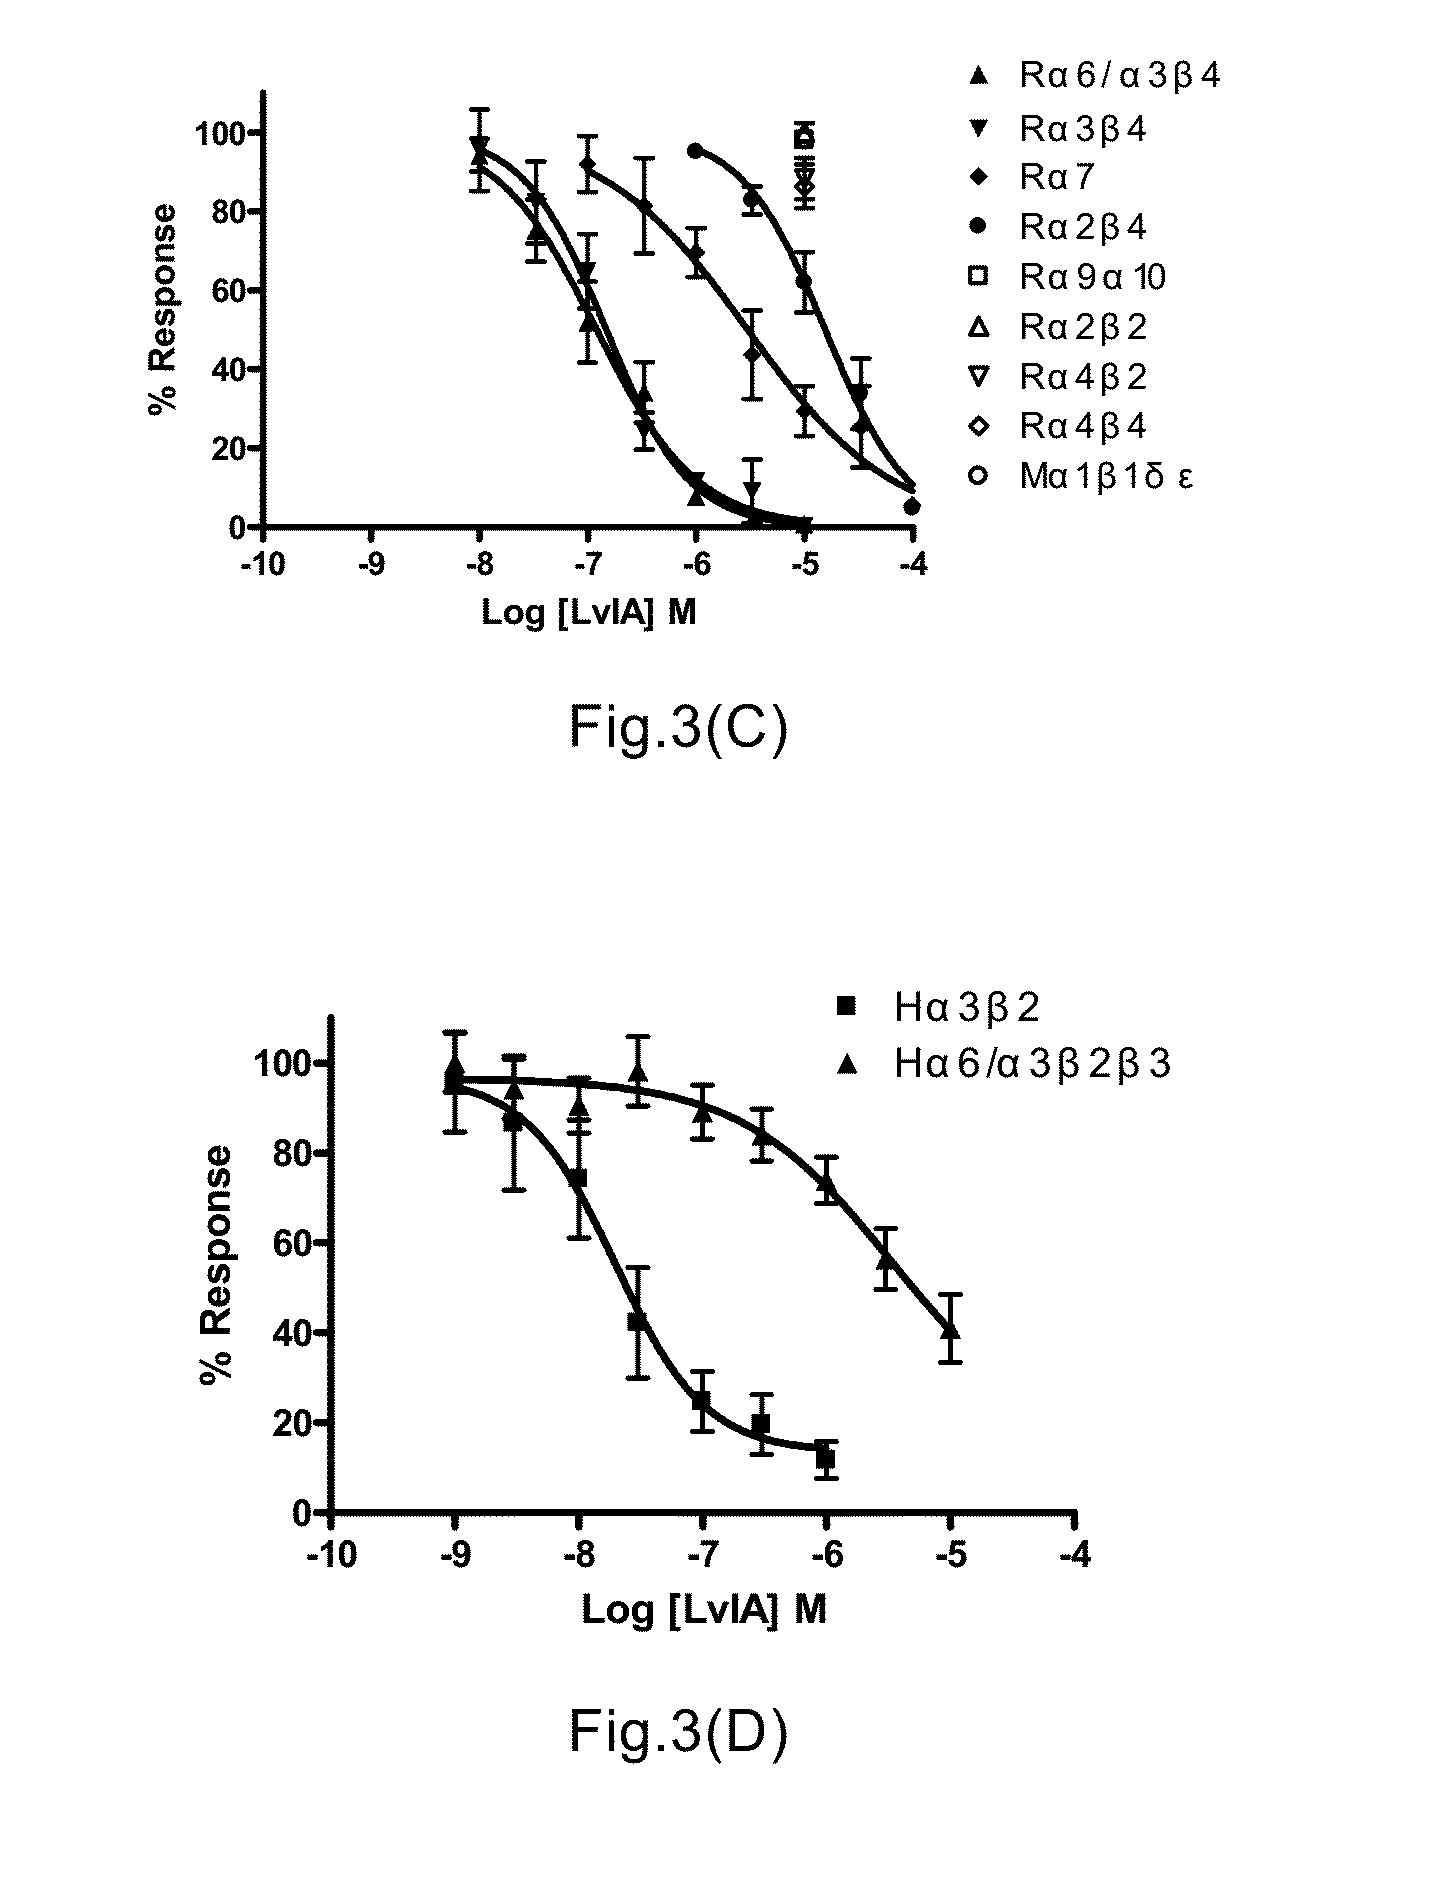 Alpha-CONOTOXIN PEPTIDE, PHARMACEUTICAL COMPOSITION AND USE THEREOF